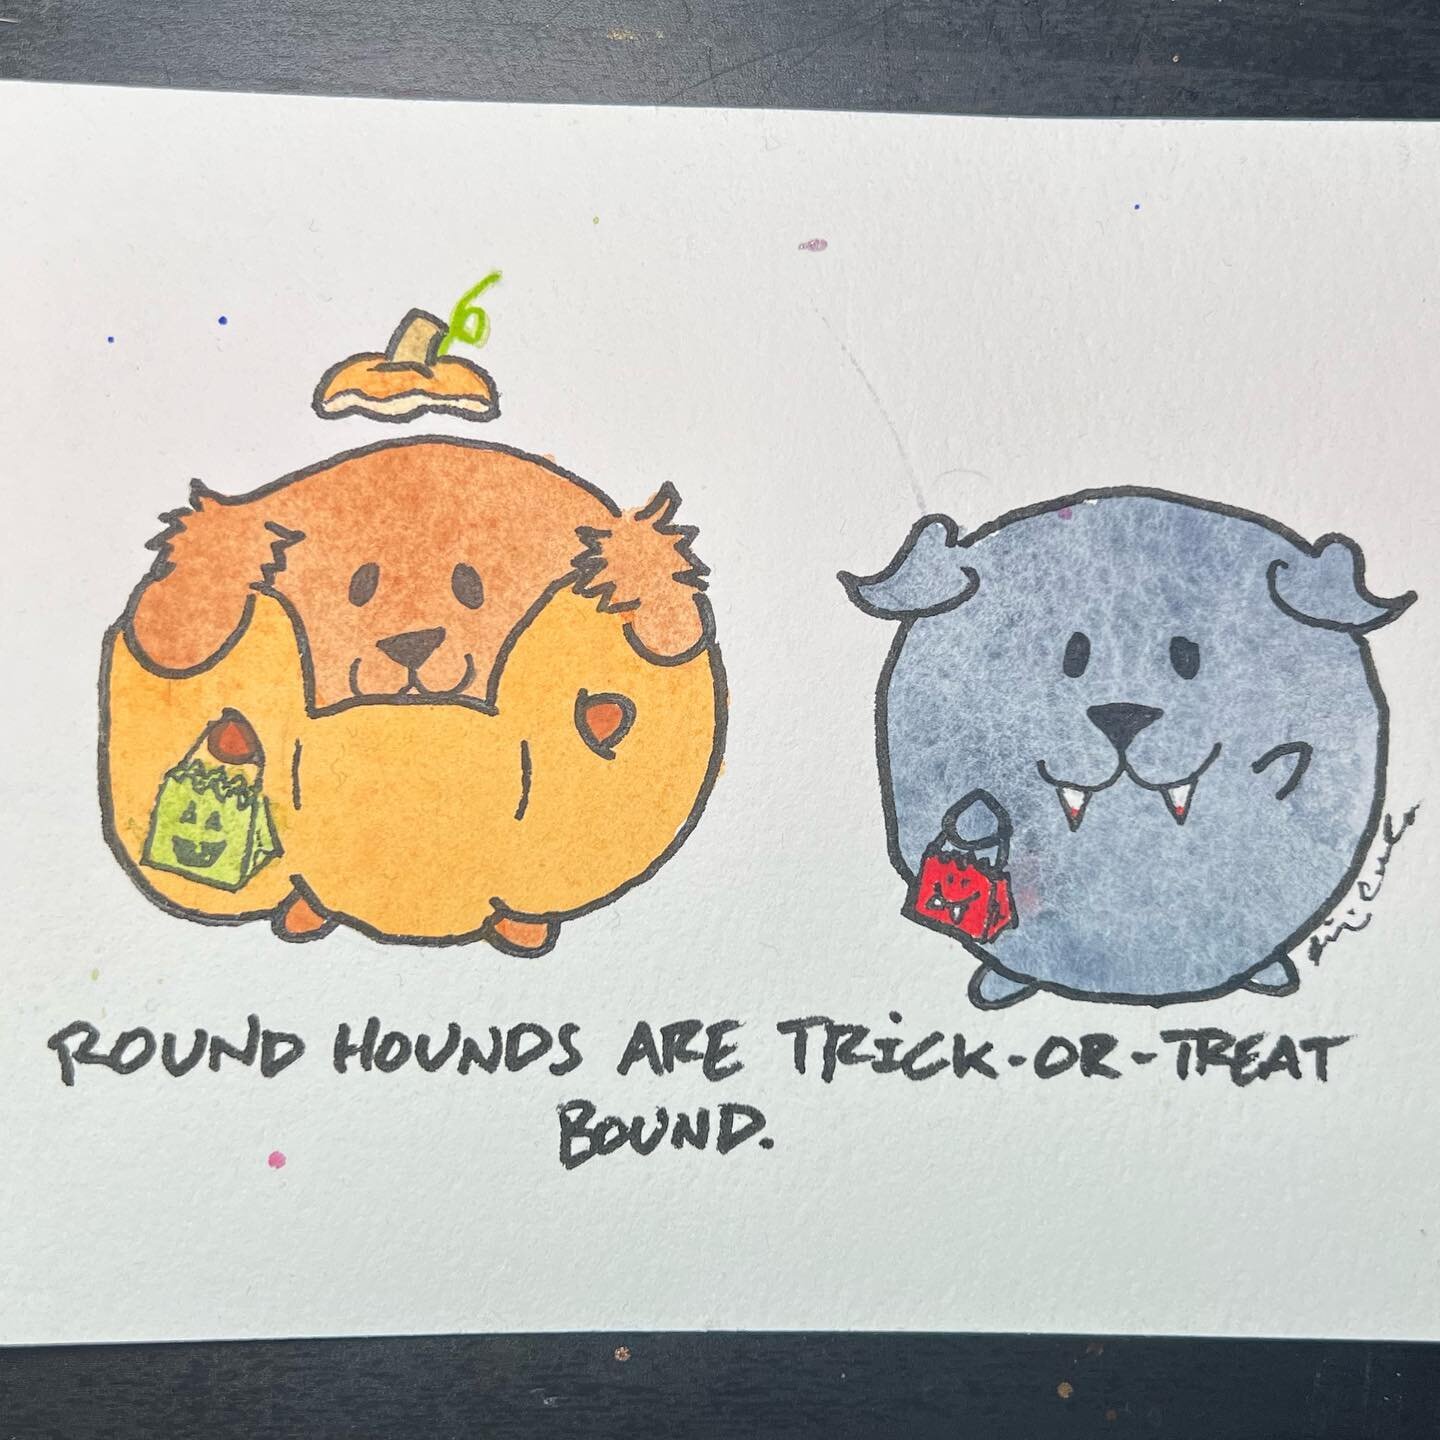 Happy Halloween from me and the Round Hounds! 

#roundhounds #dogart #dogs #art #watercolor #nikkicawleyart #queenrosie #elsabacondoobie #cute #cartoon #drawing